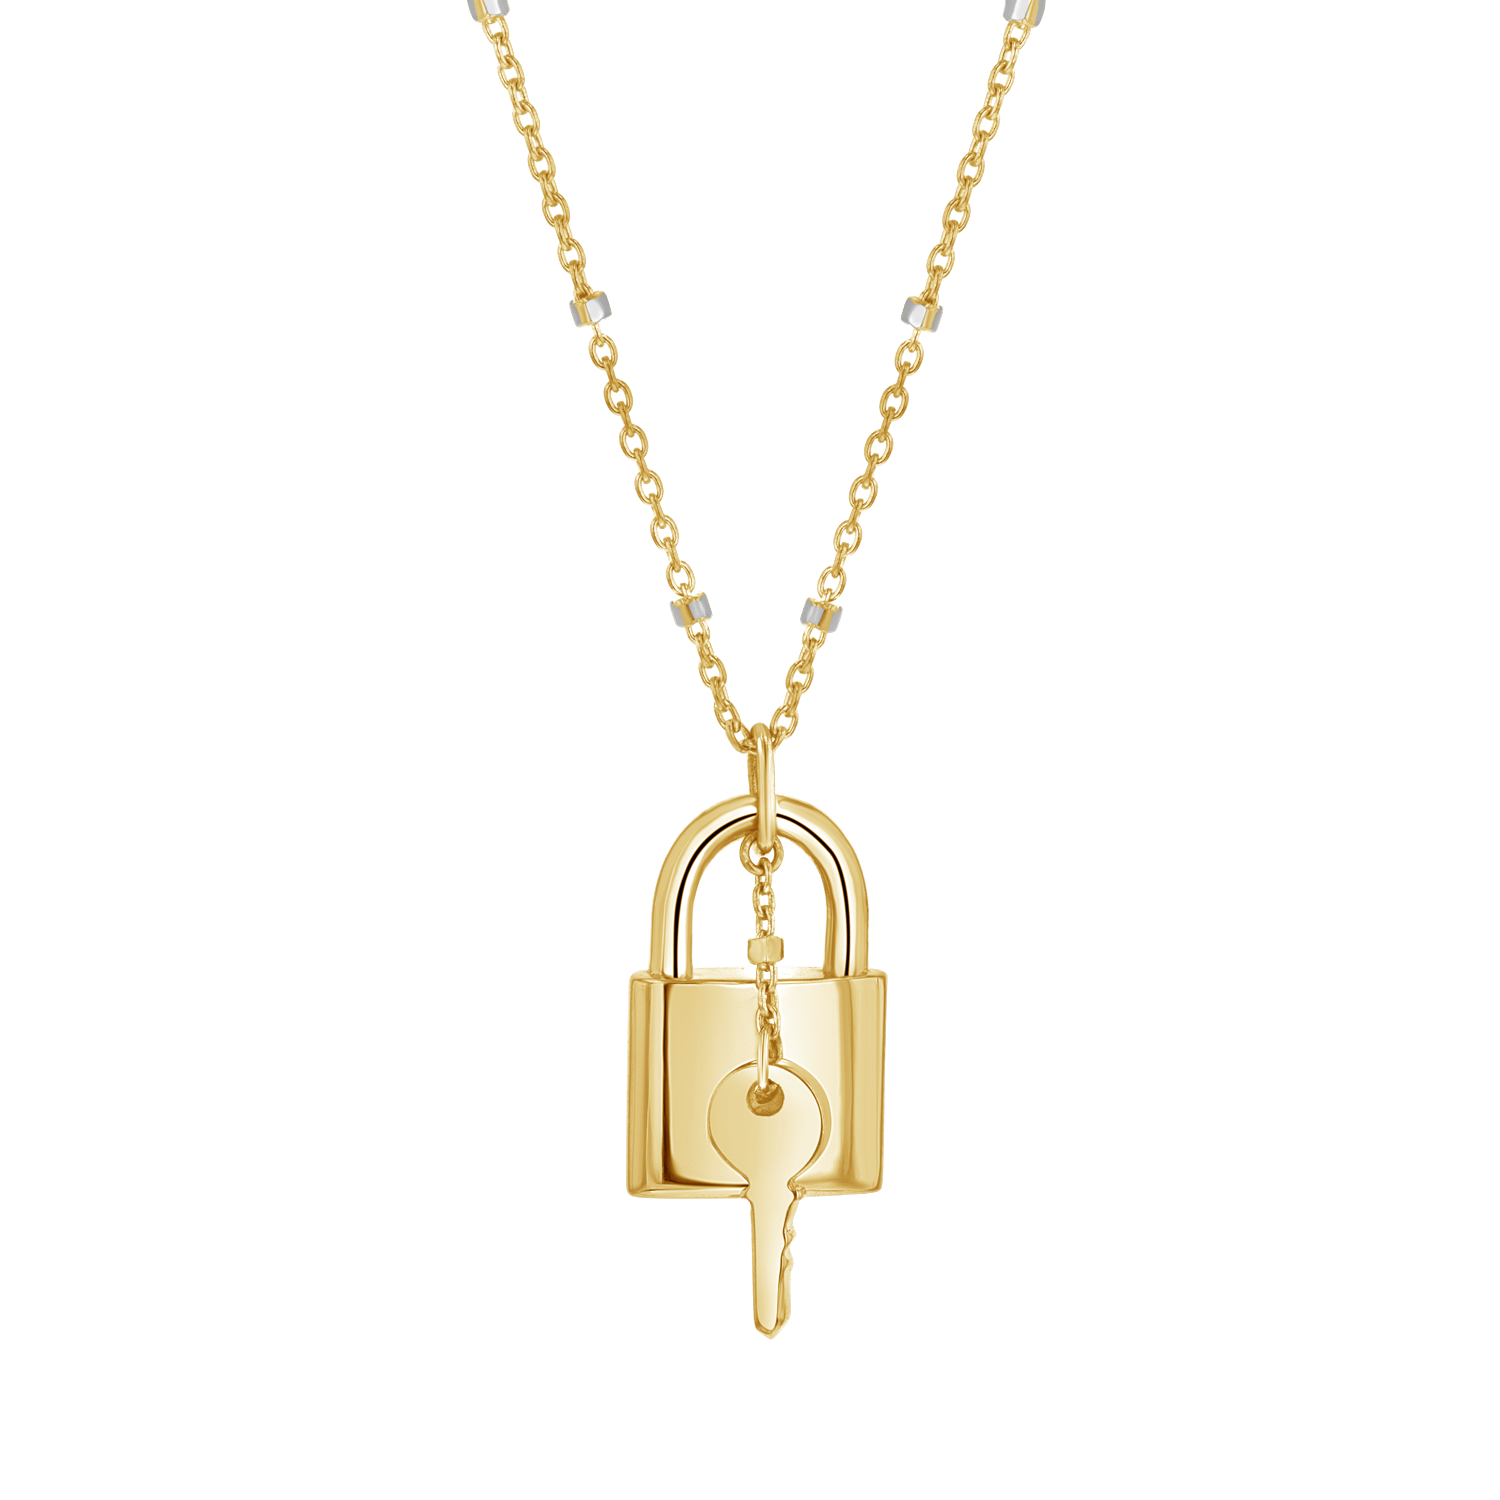 Love Padlock and Key Sparkle Chain Necklace 14K Yellow Gold / 20 Inches by Baby Gold - Shop Custom Gold Jewelry